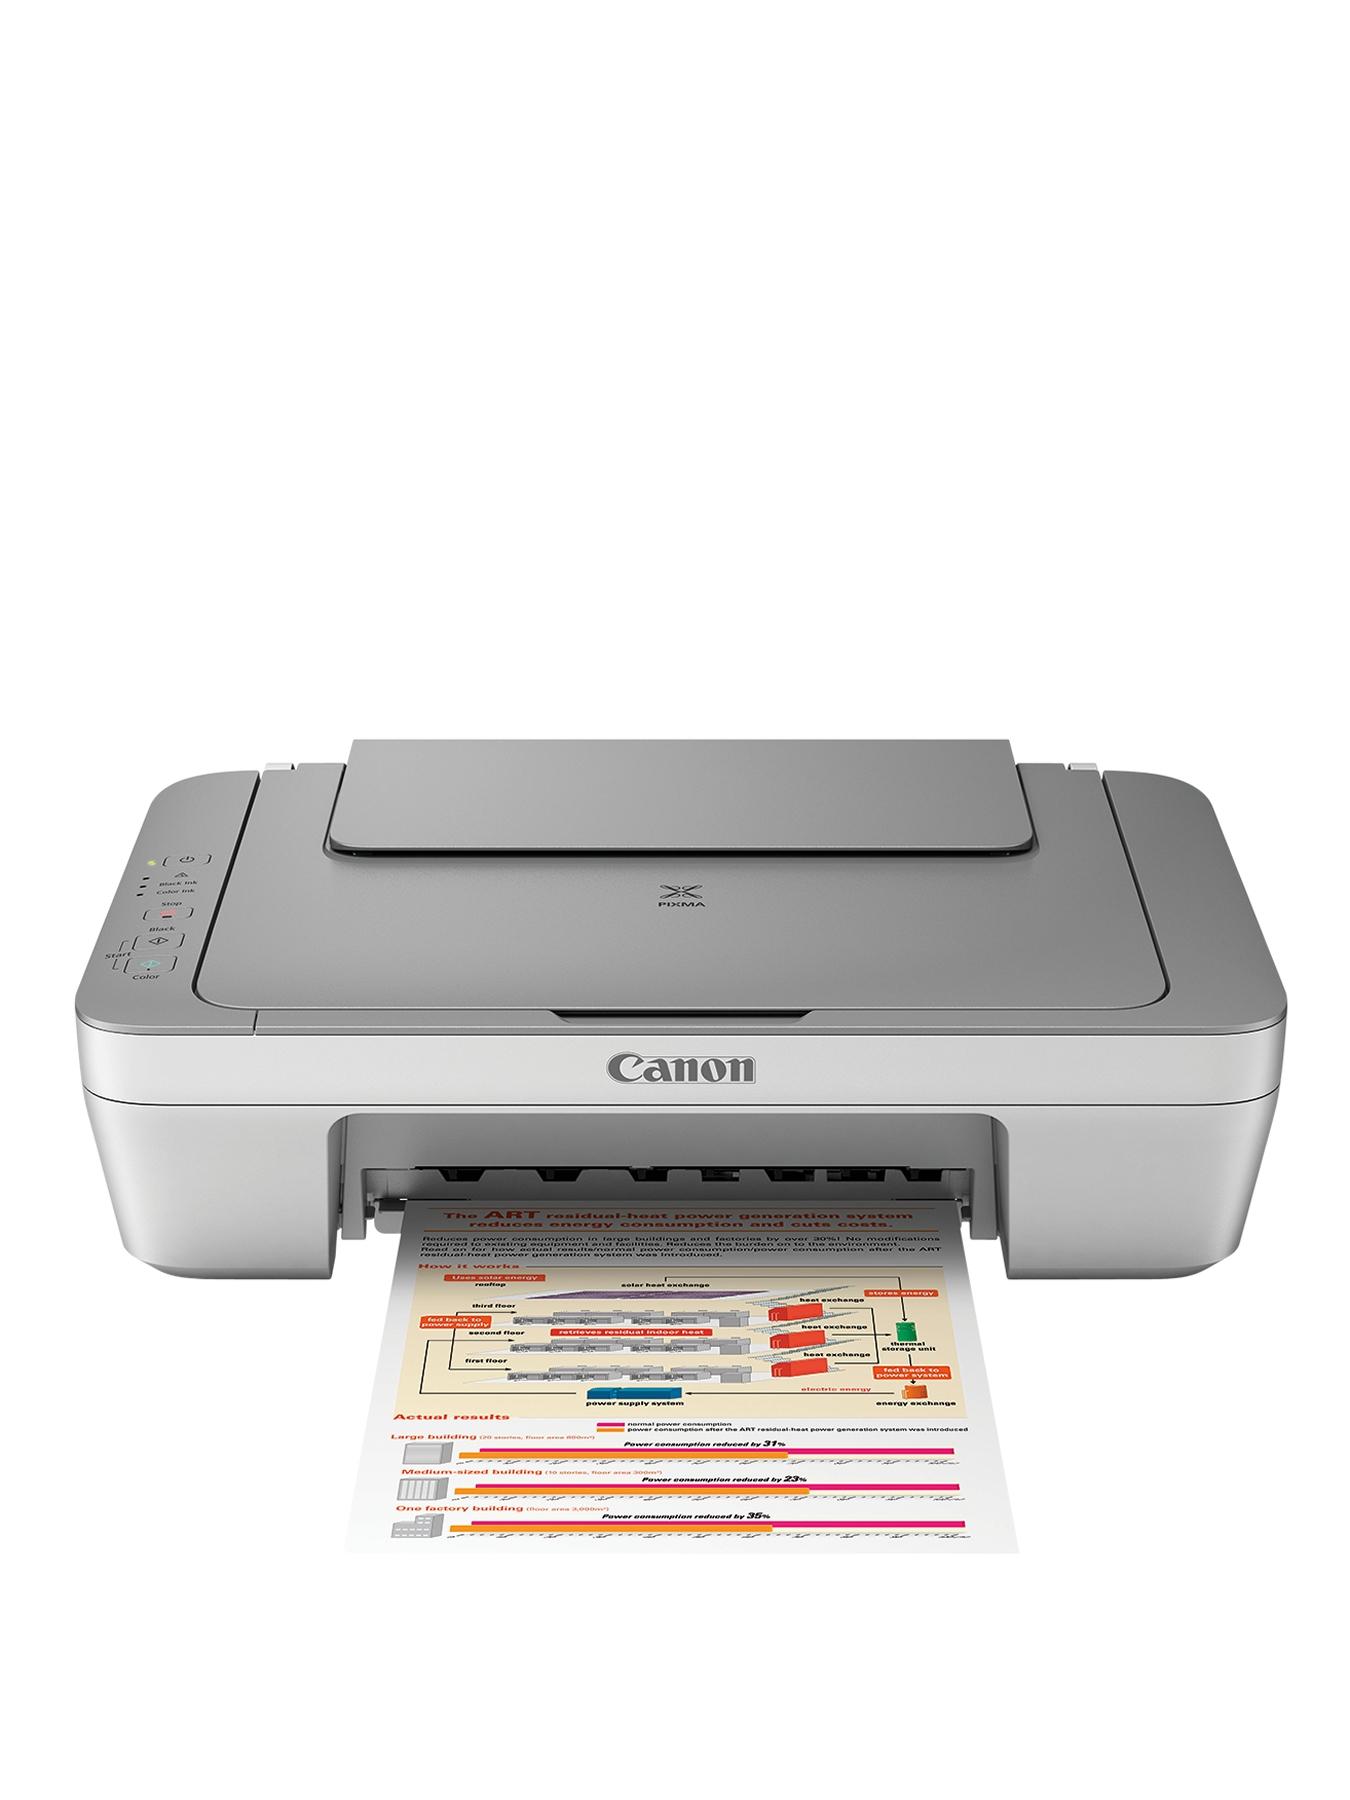 Canon Imagerunner 2420 Driver Free Download For Windows 7 64 Bit